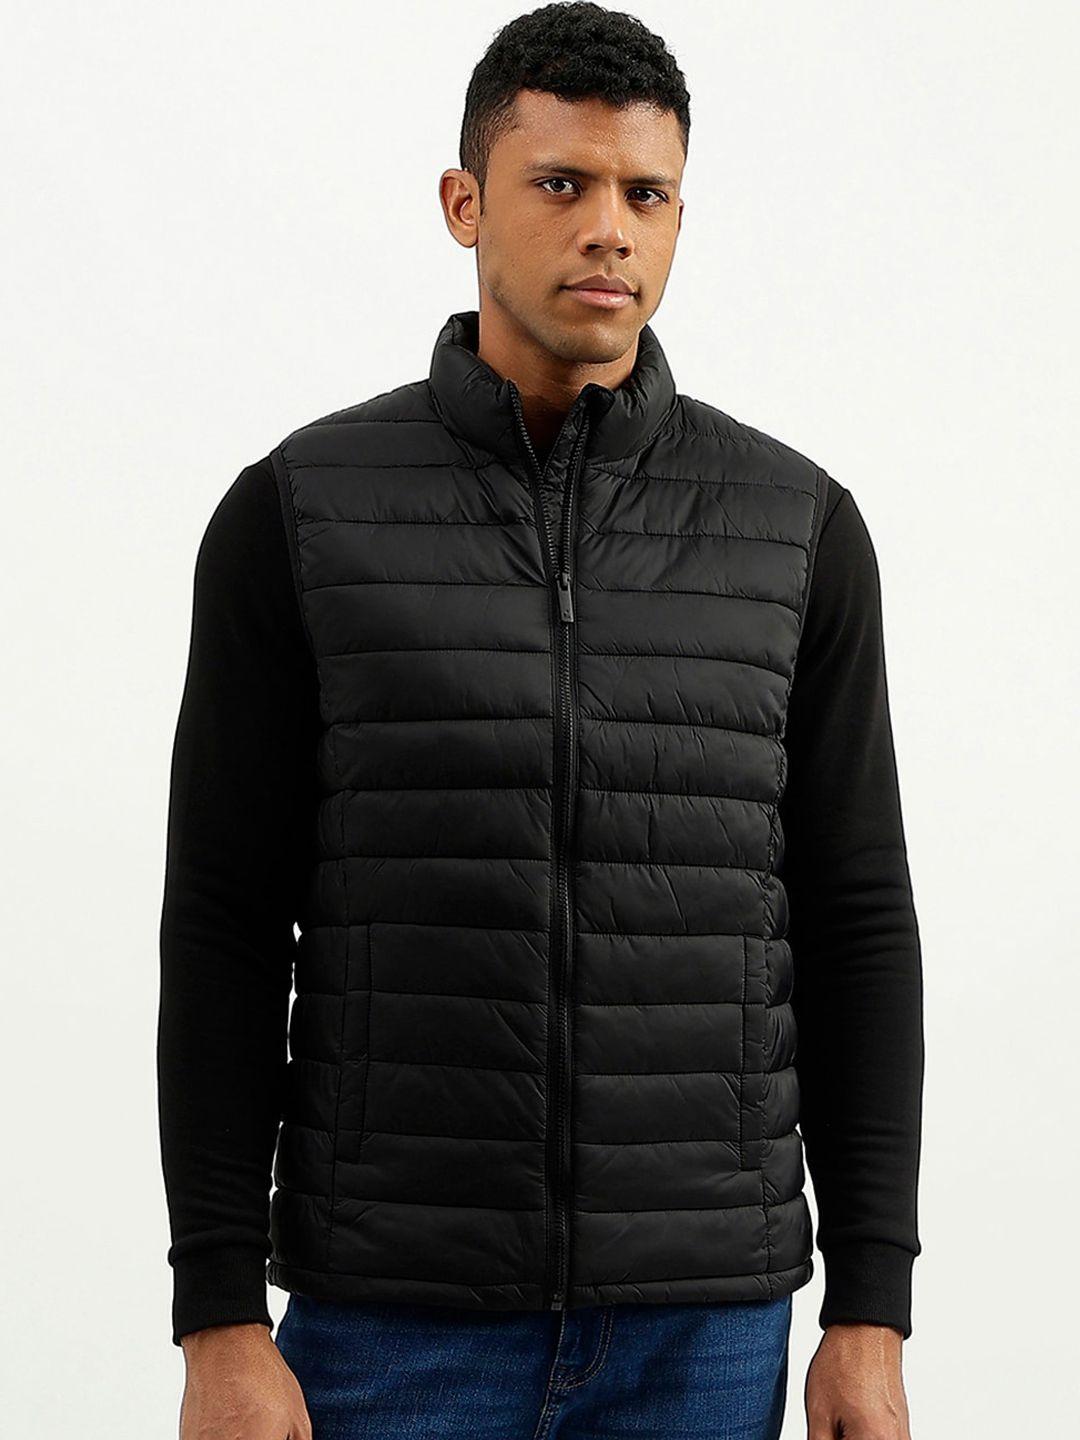 united-colors-of-benetton-mock-collar-quilted-jacket